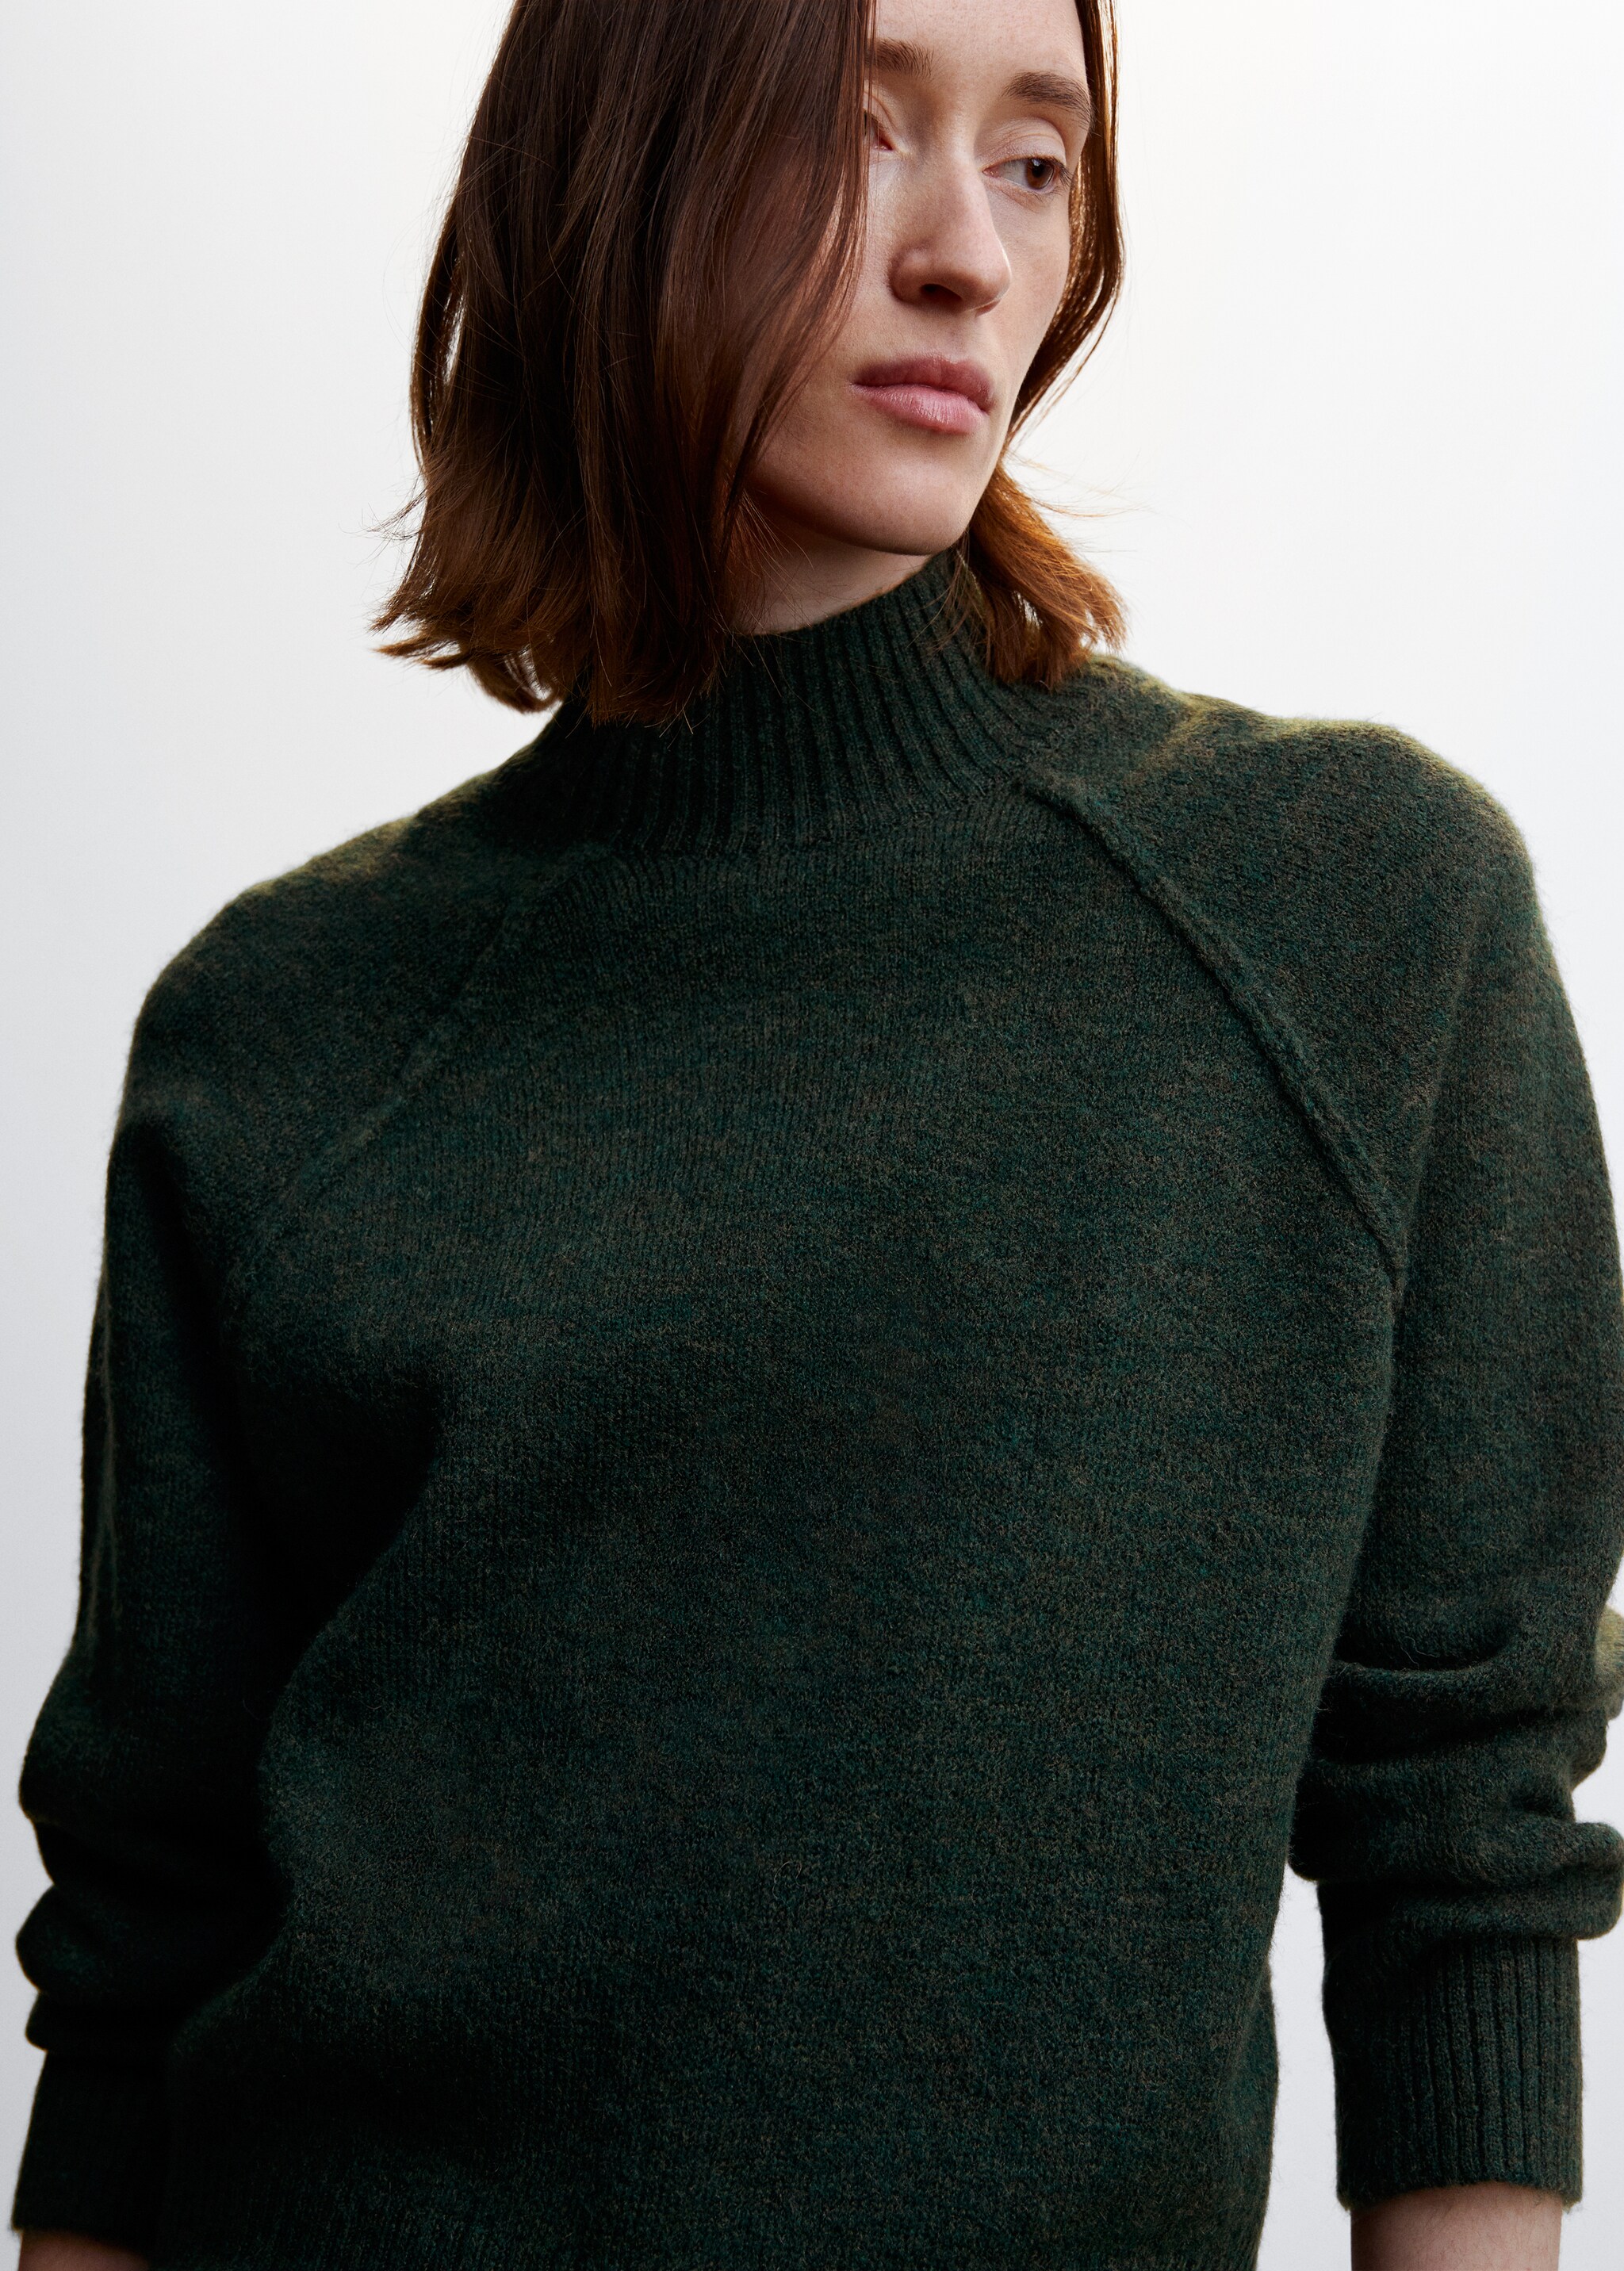 Turtleneck sweater with seams - Details of the article 3